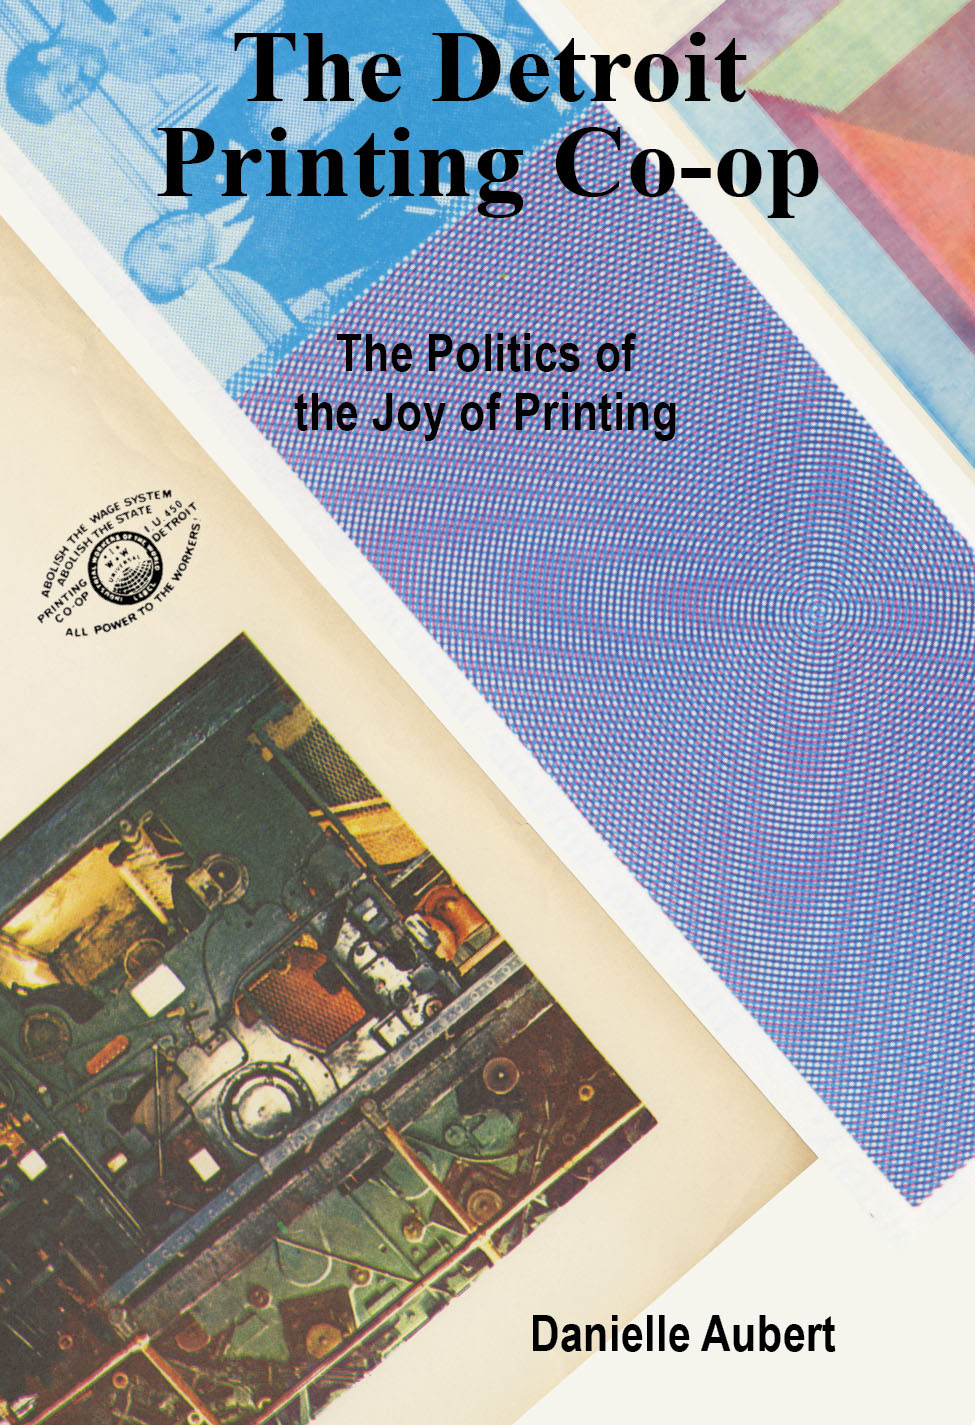 Politics of the Joy of Printing, the cover